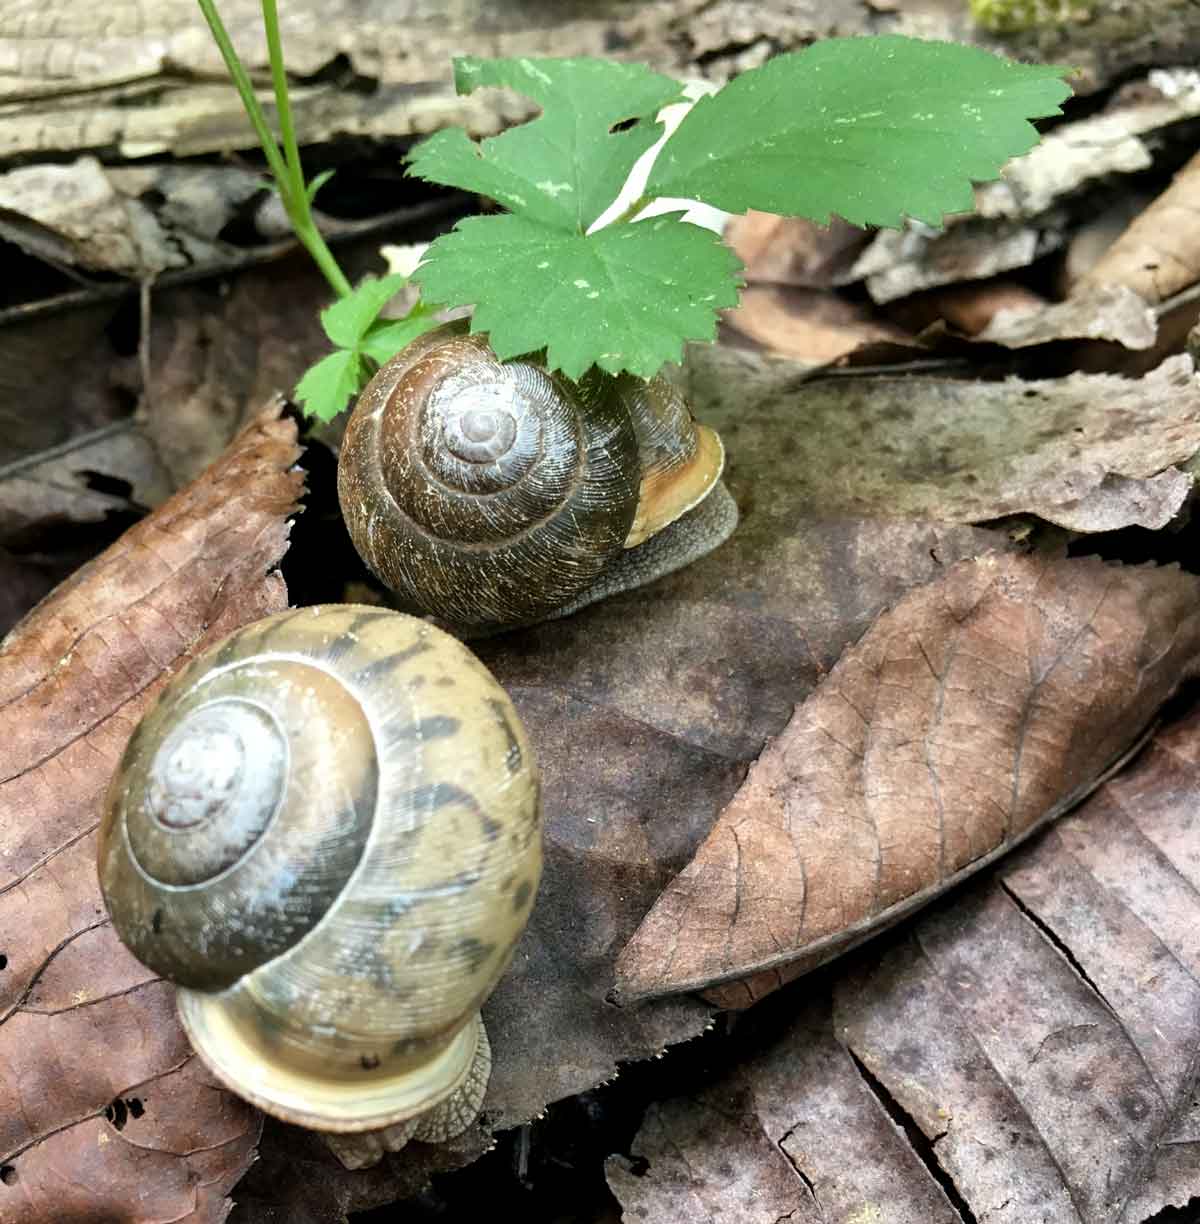 A pair of snails.